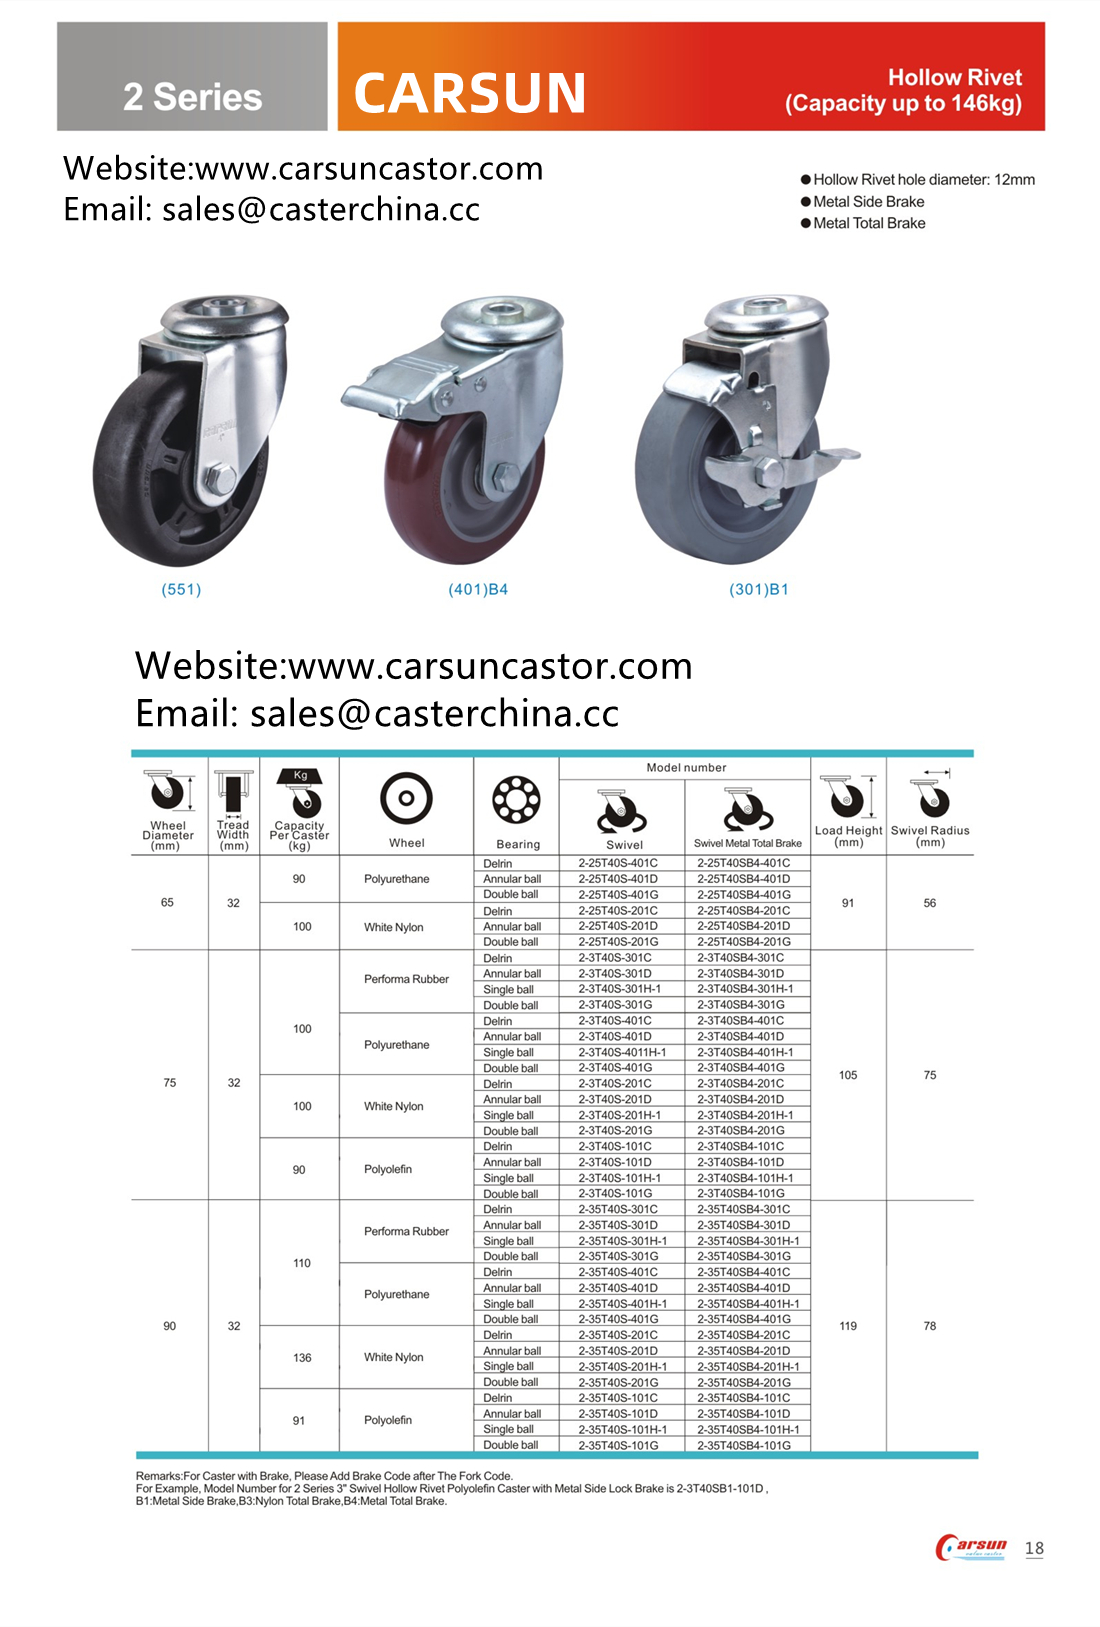 hollow rivet casters industrial swivel casters with metal brake black PU caster wheels